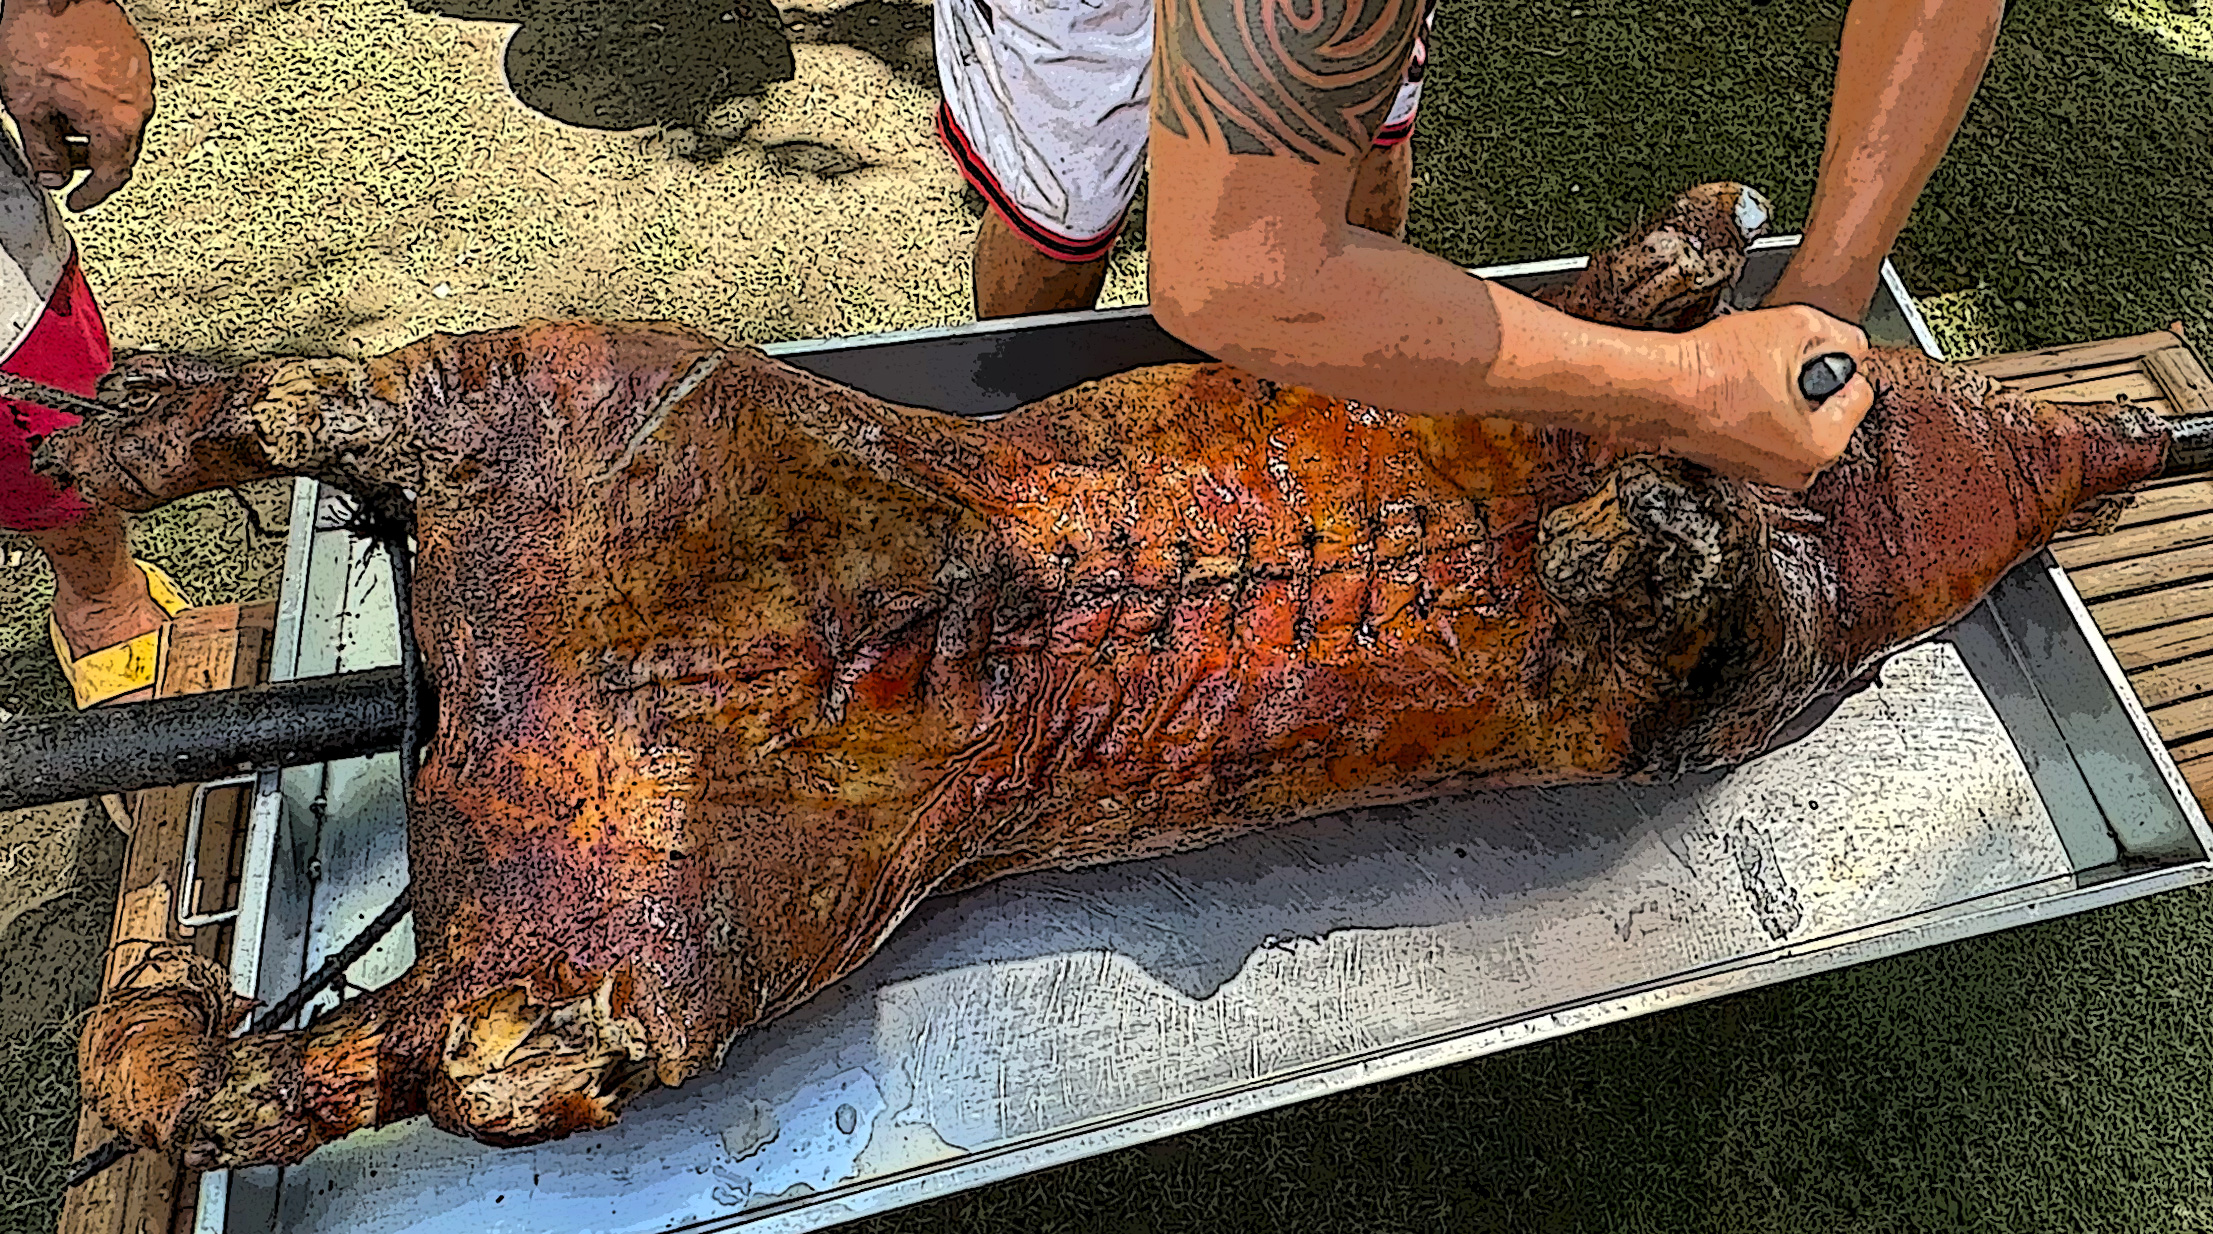 Tasting a Huge Lechon in a Mountain Barangay